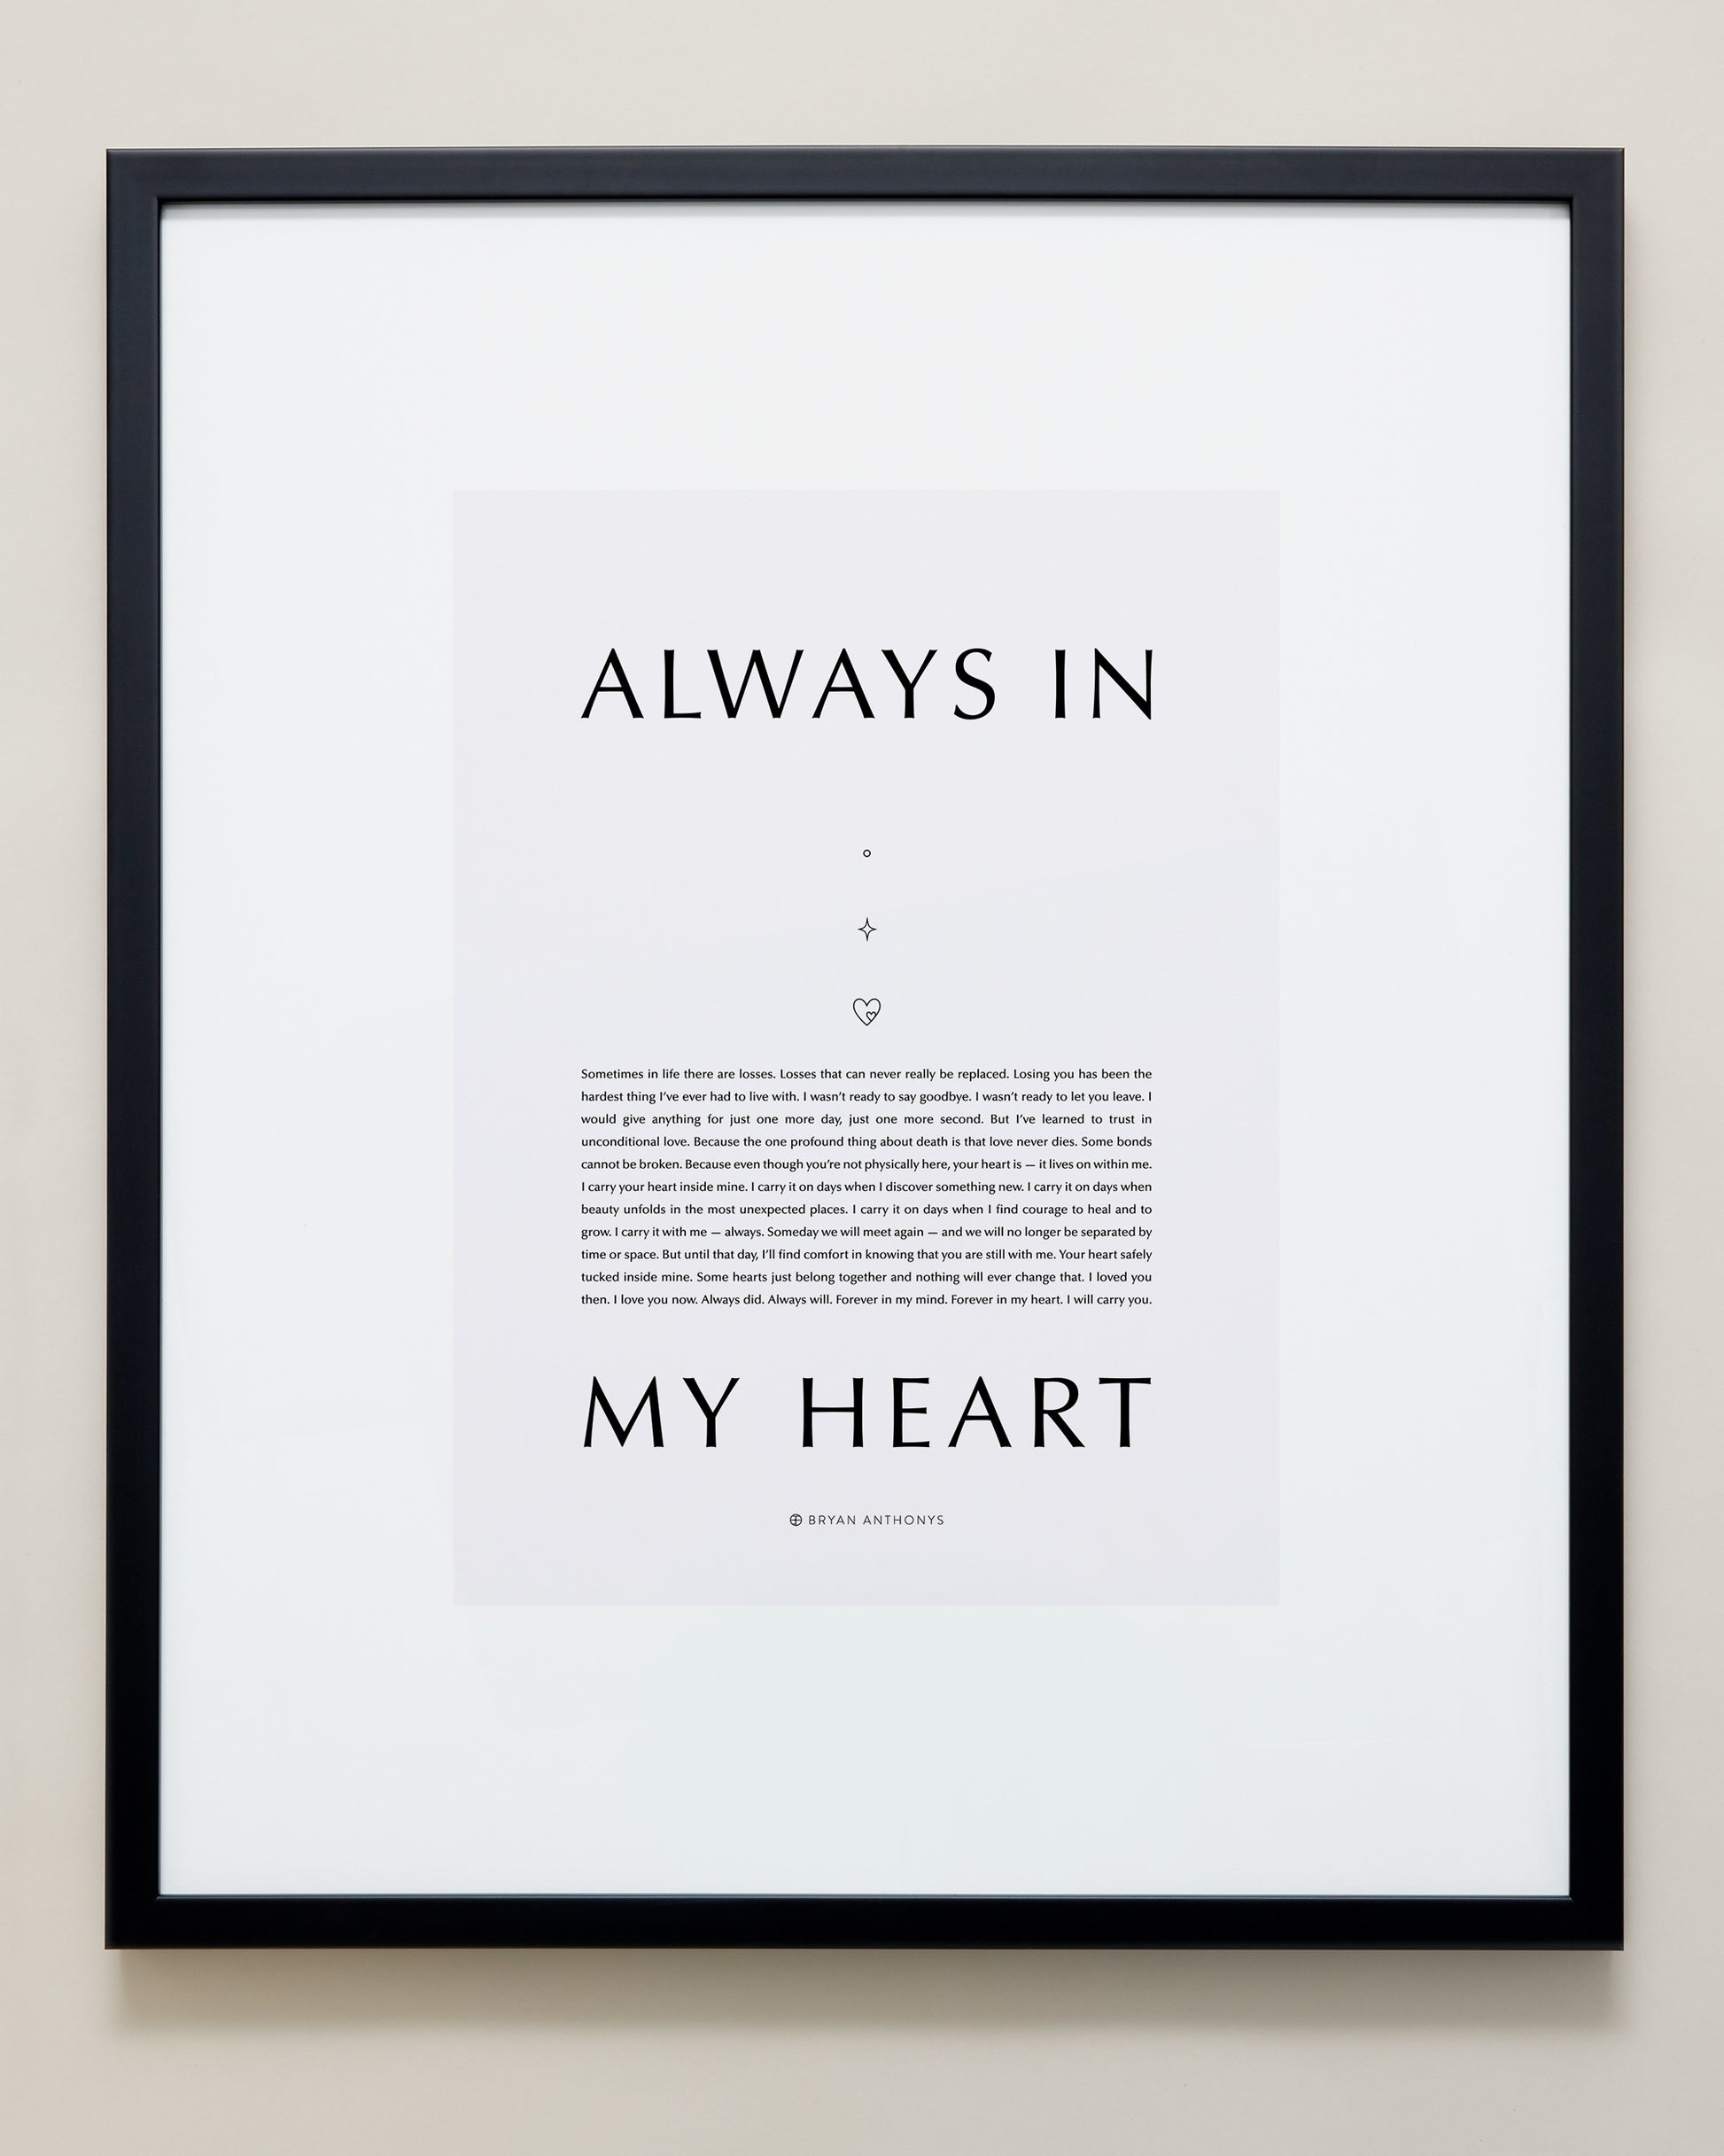 Bryan Anthonys Home Decor Purposeful Prints Always In My Heart Iconic Framed Print Gray Art With Black Frame 20x24